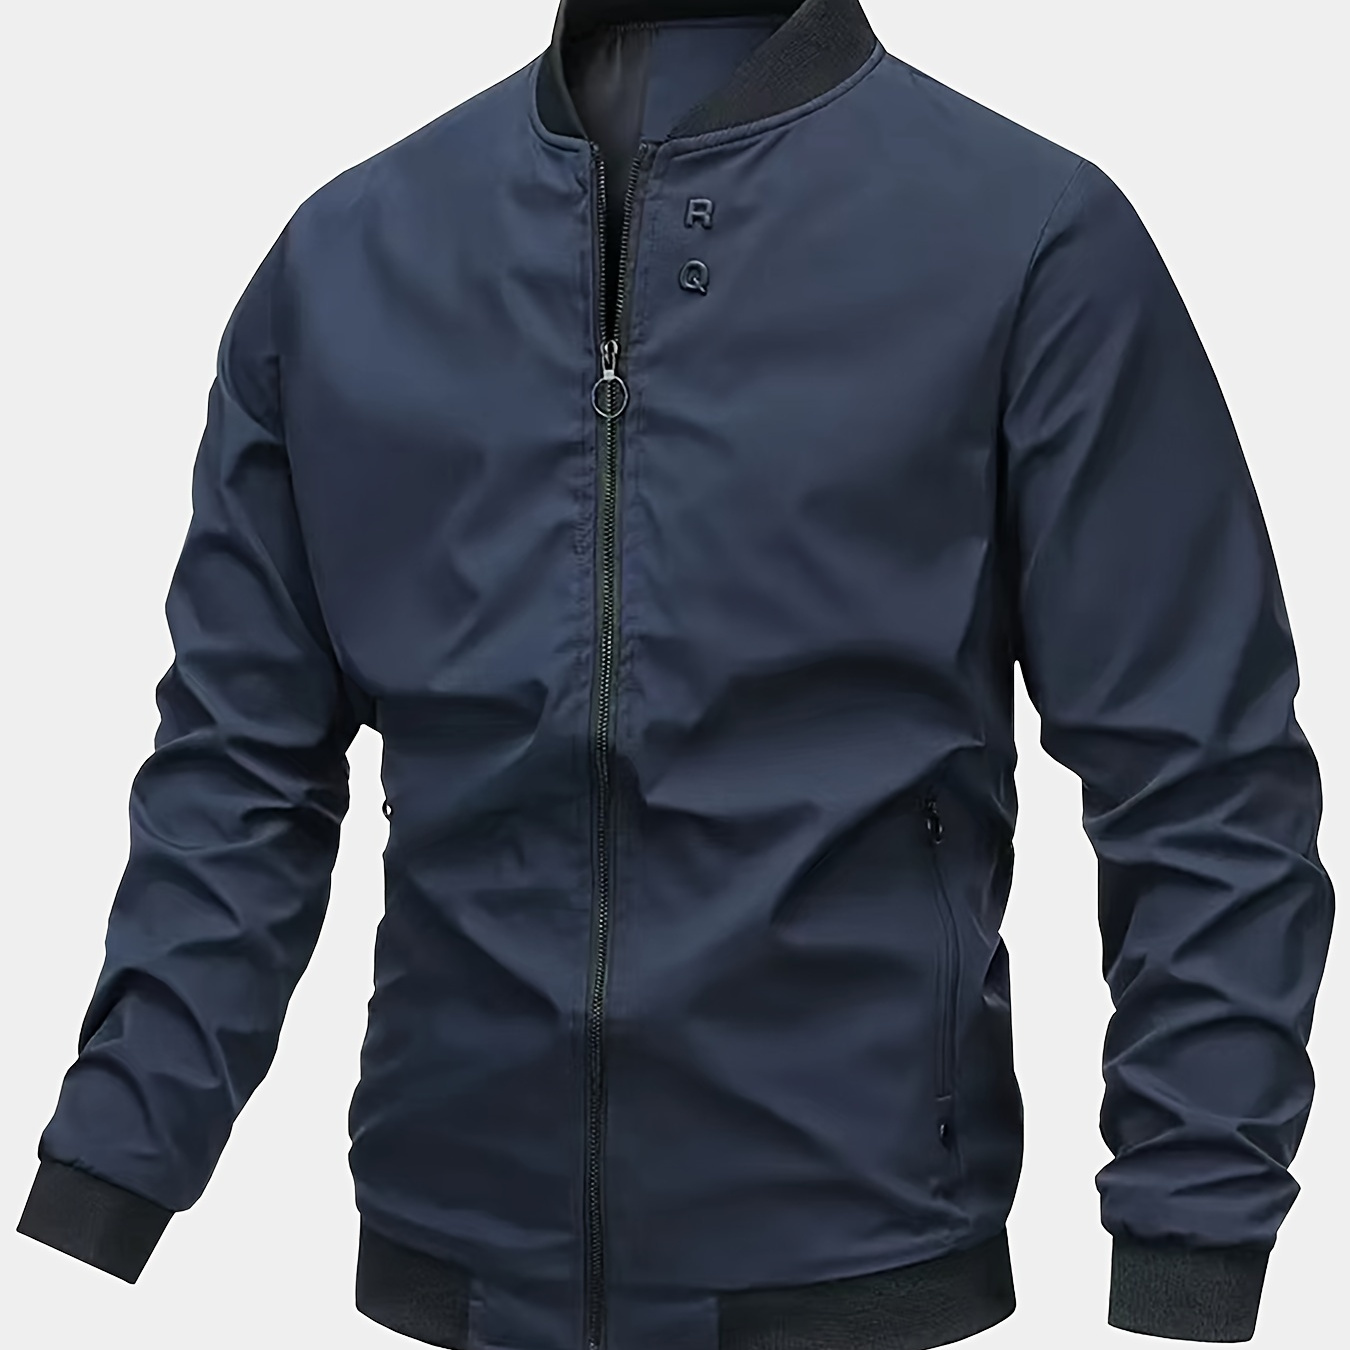 

Men's Solid Jacket With Pockets, Casual Baseball Collar Zip Up Long Sleeve Outwear For Spring Fall Outdoor